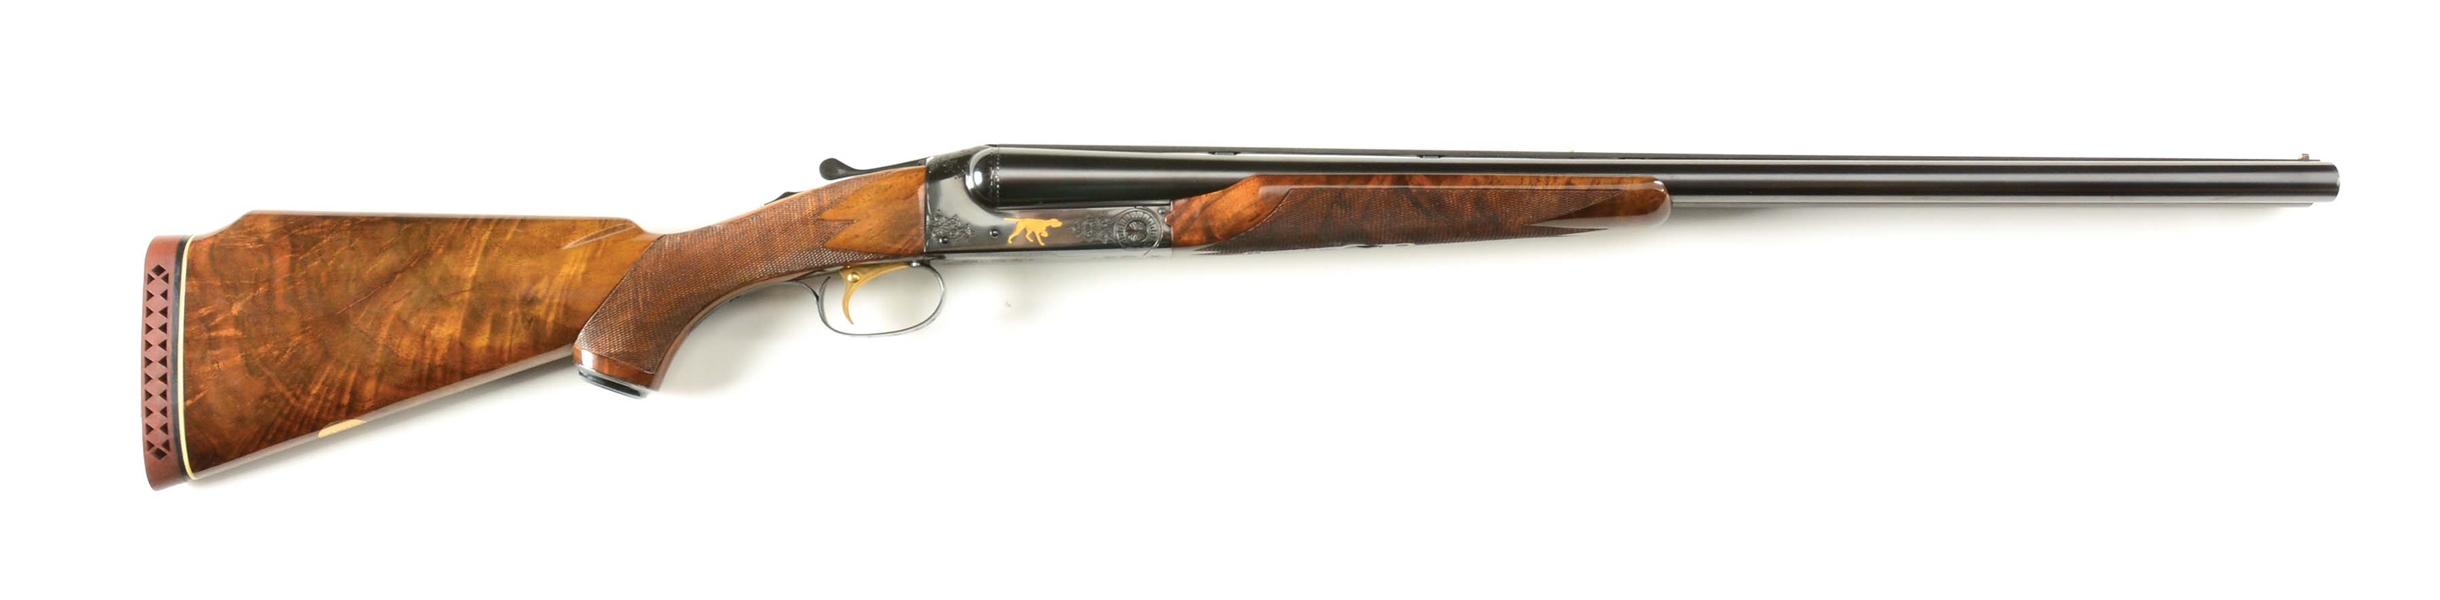 (C) TASTEFULLY APPOINTED WINCHESTER MODEL 21 FACTORY CUSTOM SIDE BY SIDE SKEET GUN "ALL  OPTIONS" WITH GOLD INLAY.